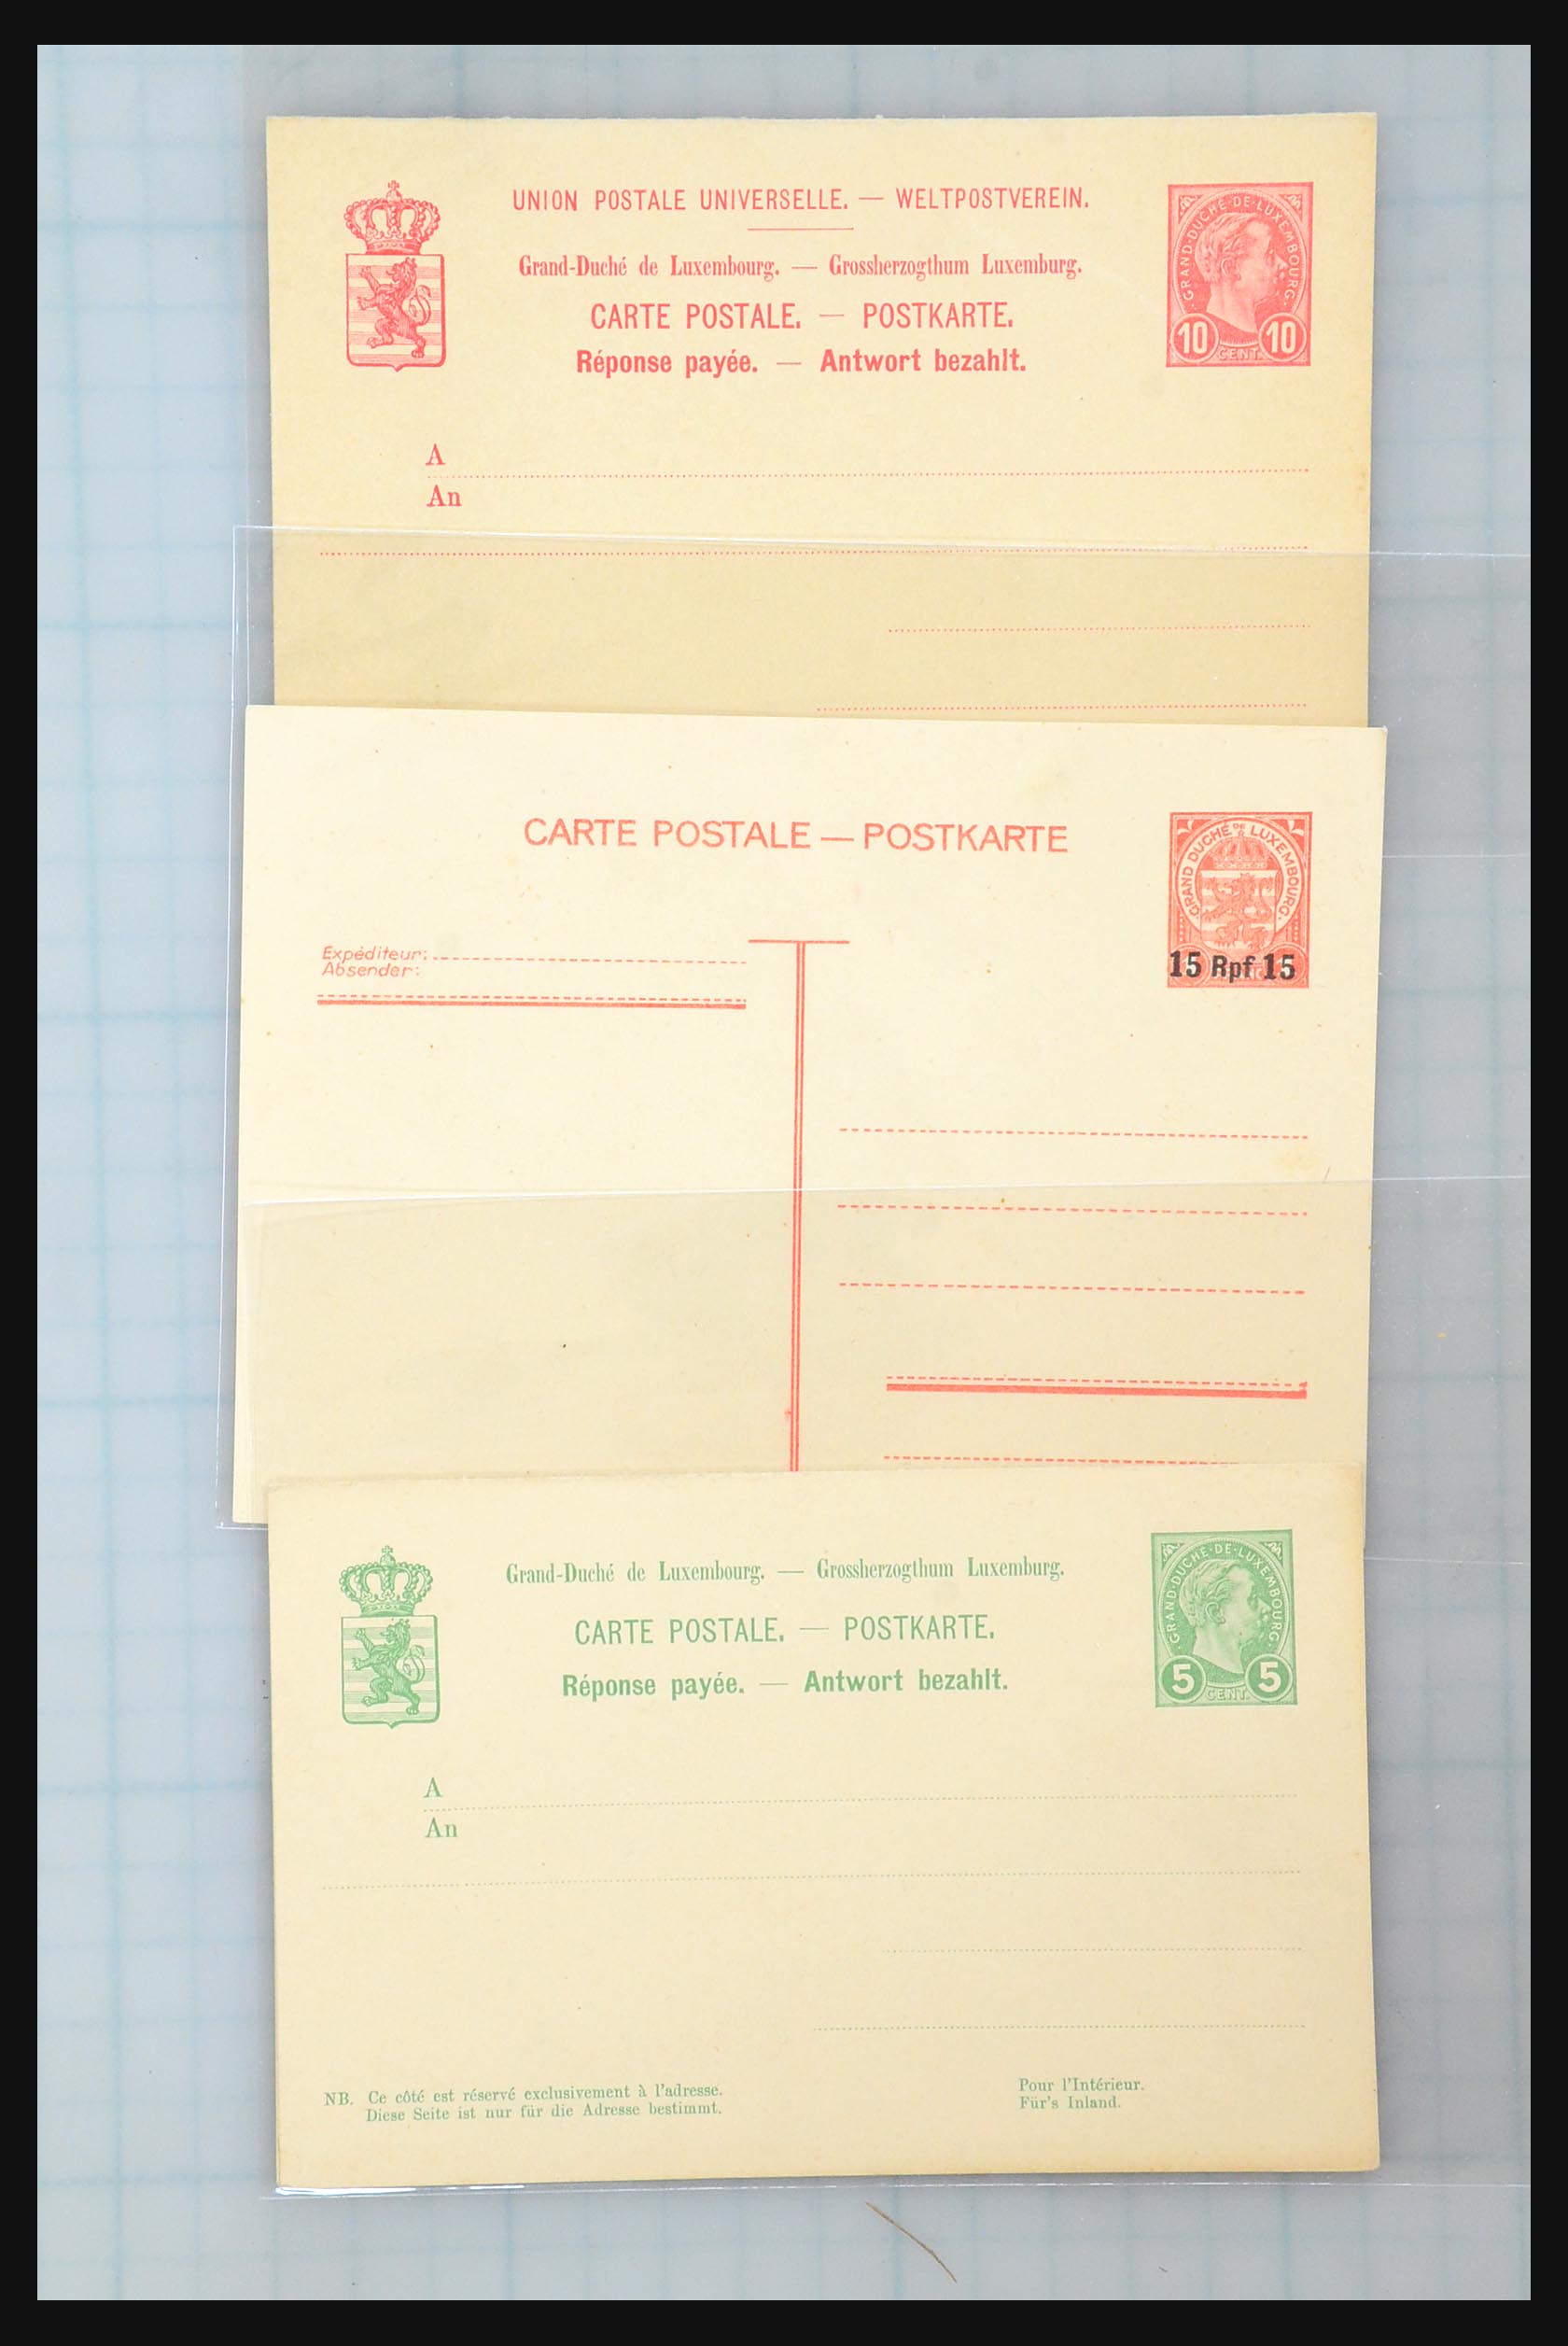 31358 082 - 31358 Portugal/Luxemburg/Greece covers 1880-1960.